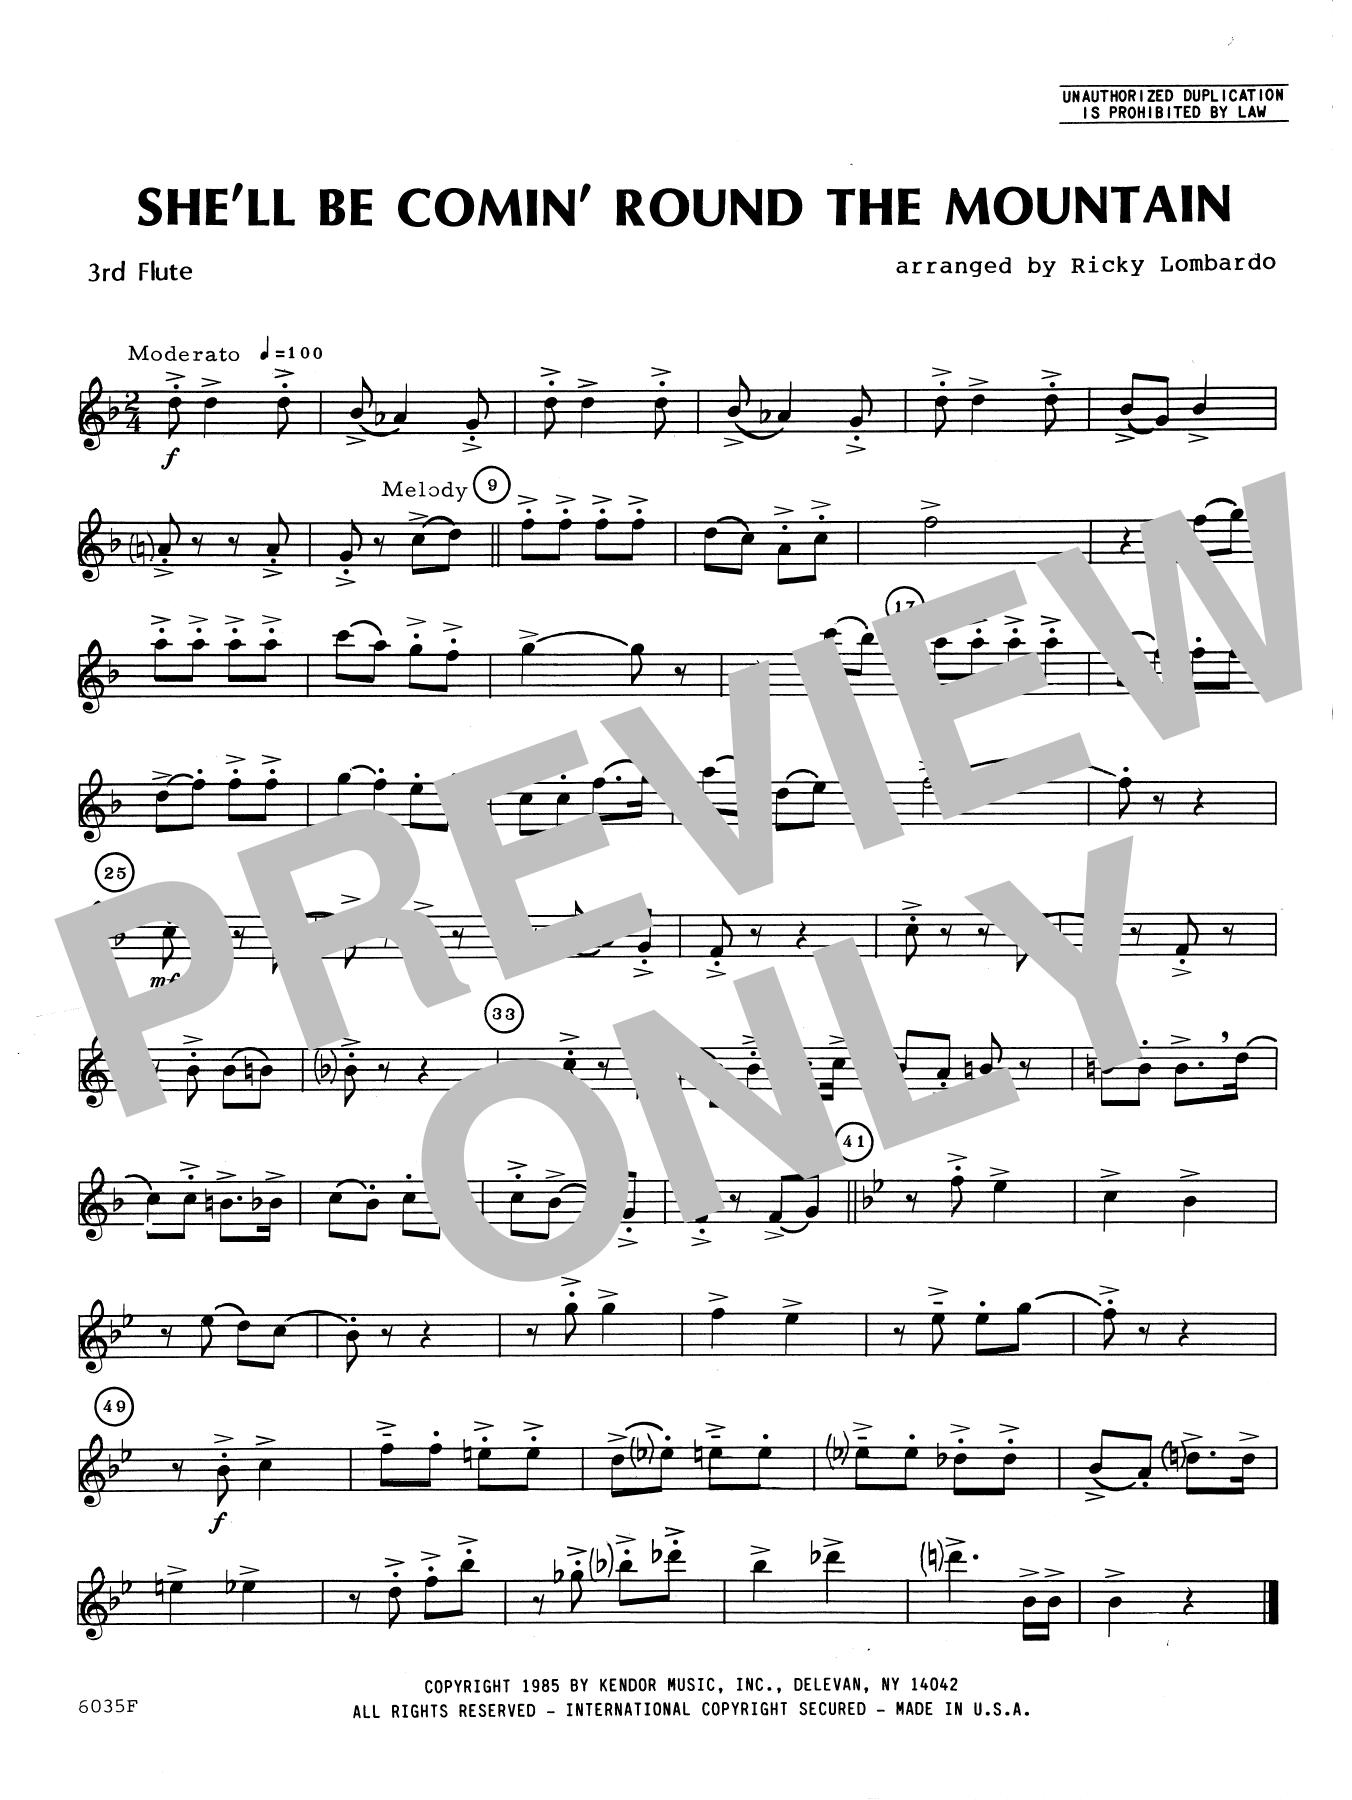 Download Ricky Lombardo She'll Be Comin' Round the Mountain - 3 Sheet Music